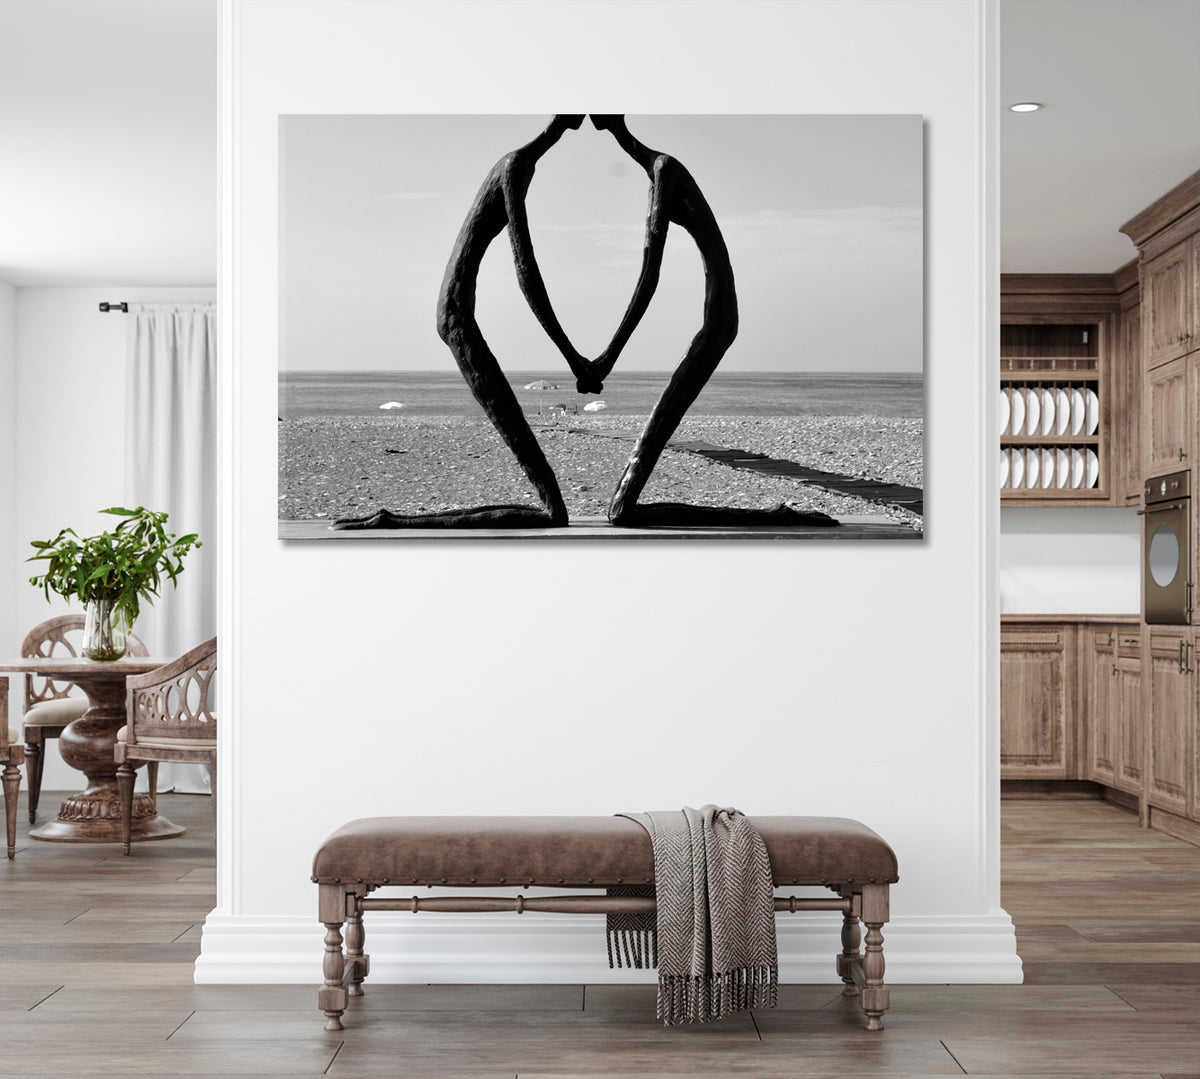 Abstract Architectural Forms People in Love Black and White Wall Art Print Artesty 1 panel 24" x 16" 